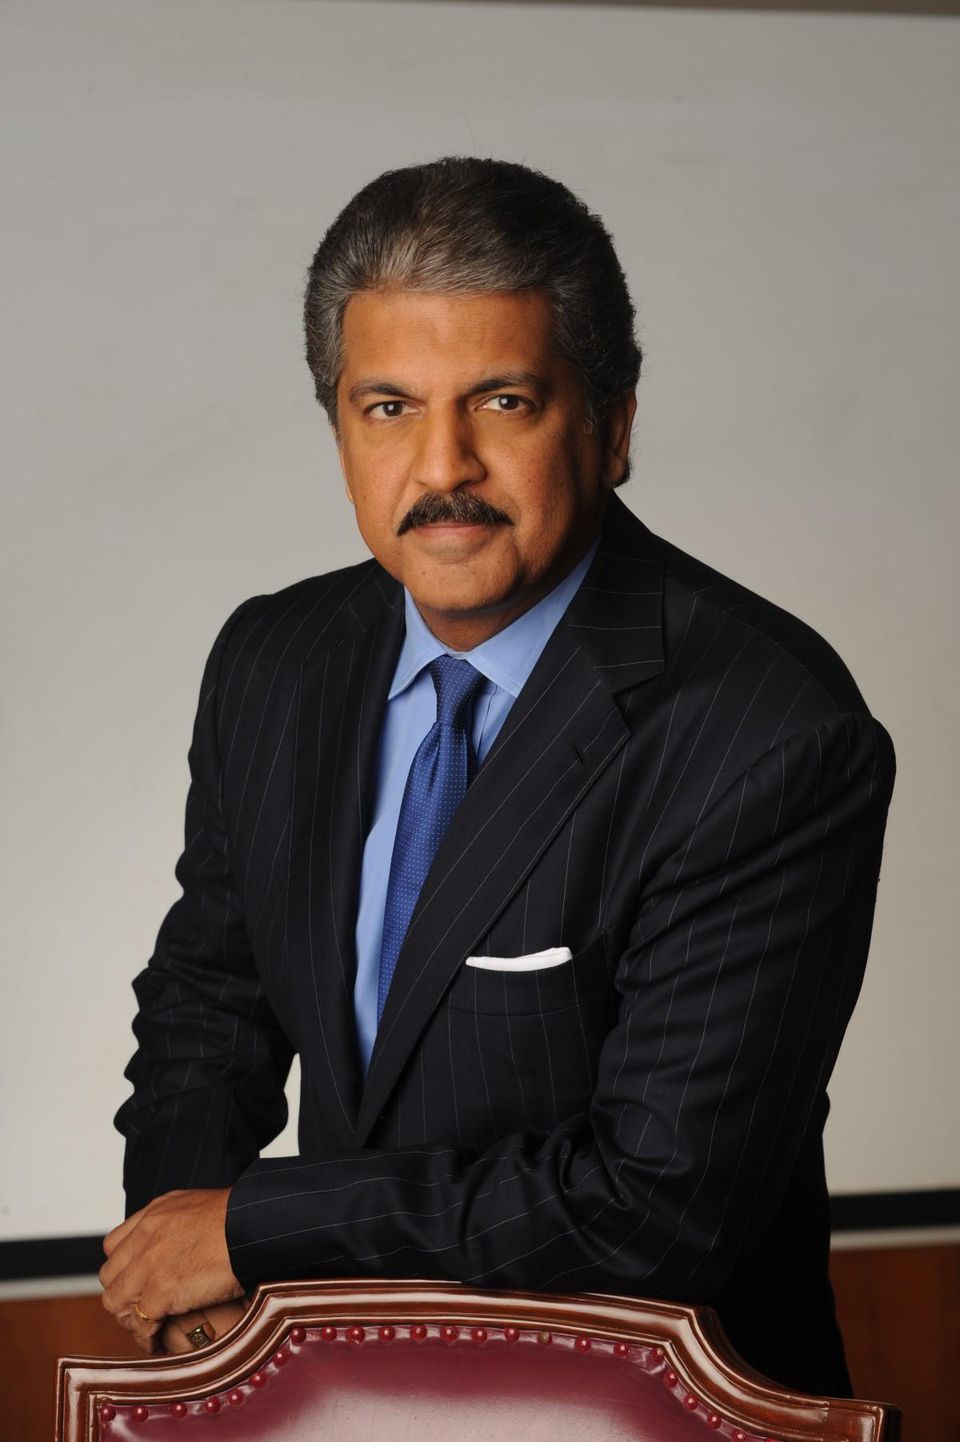 Anand Mahindra's Tweet About Learning Garba Will Give You A Joyful Start Today RVCJ Media